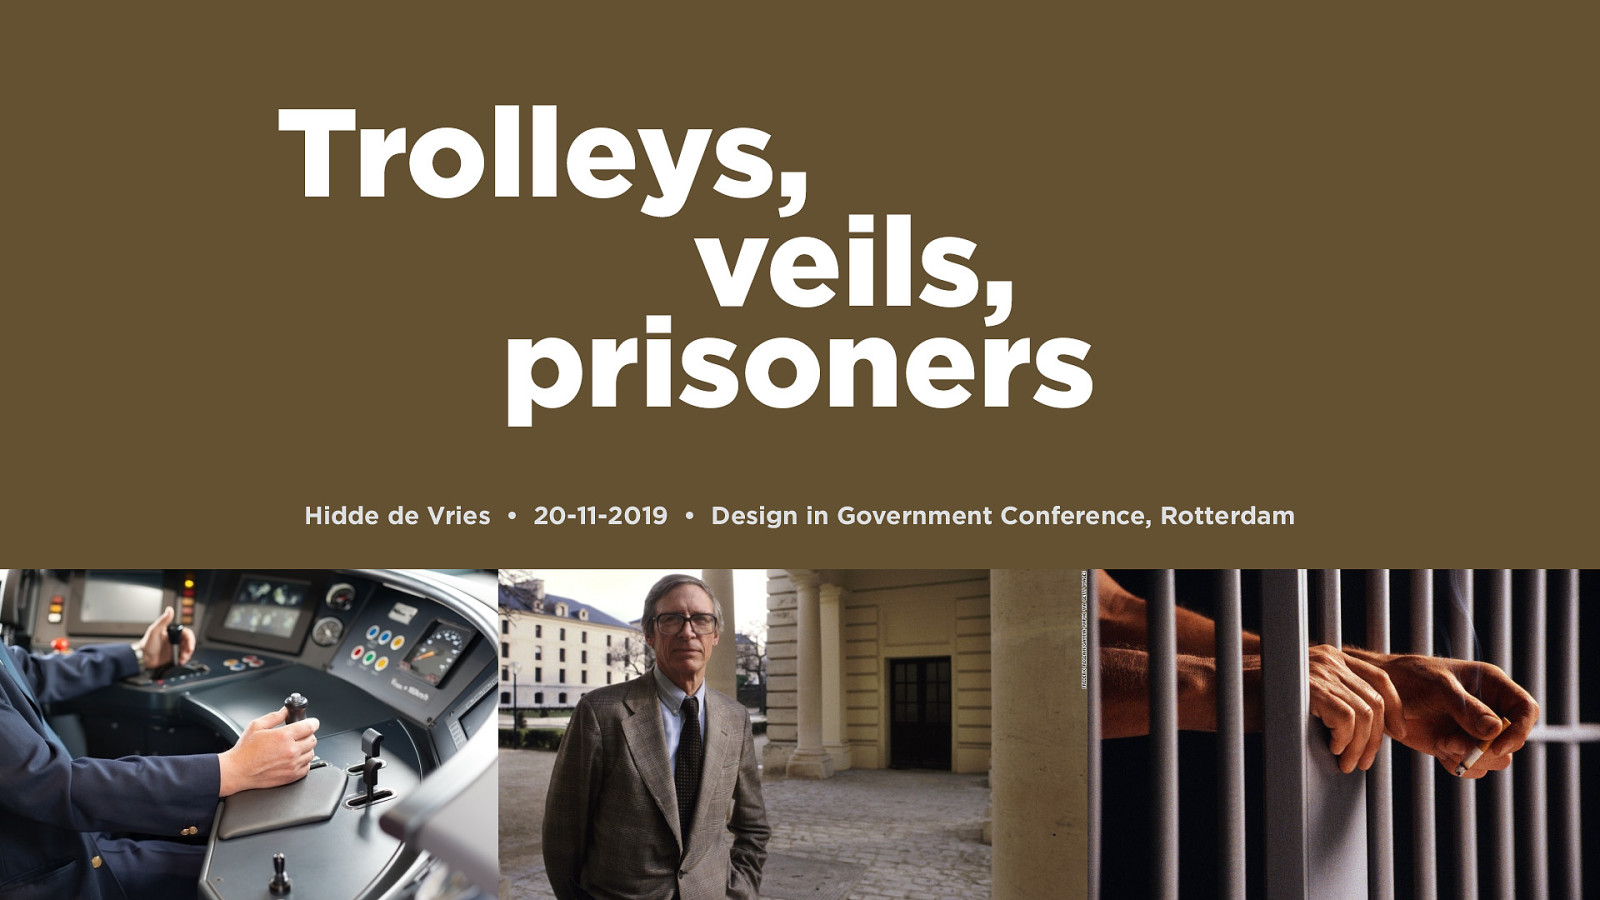 Trolleys, veils and prisoners: the case for accessibility from philosophical ethics